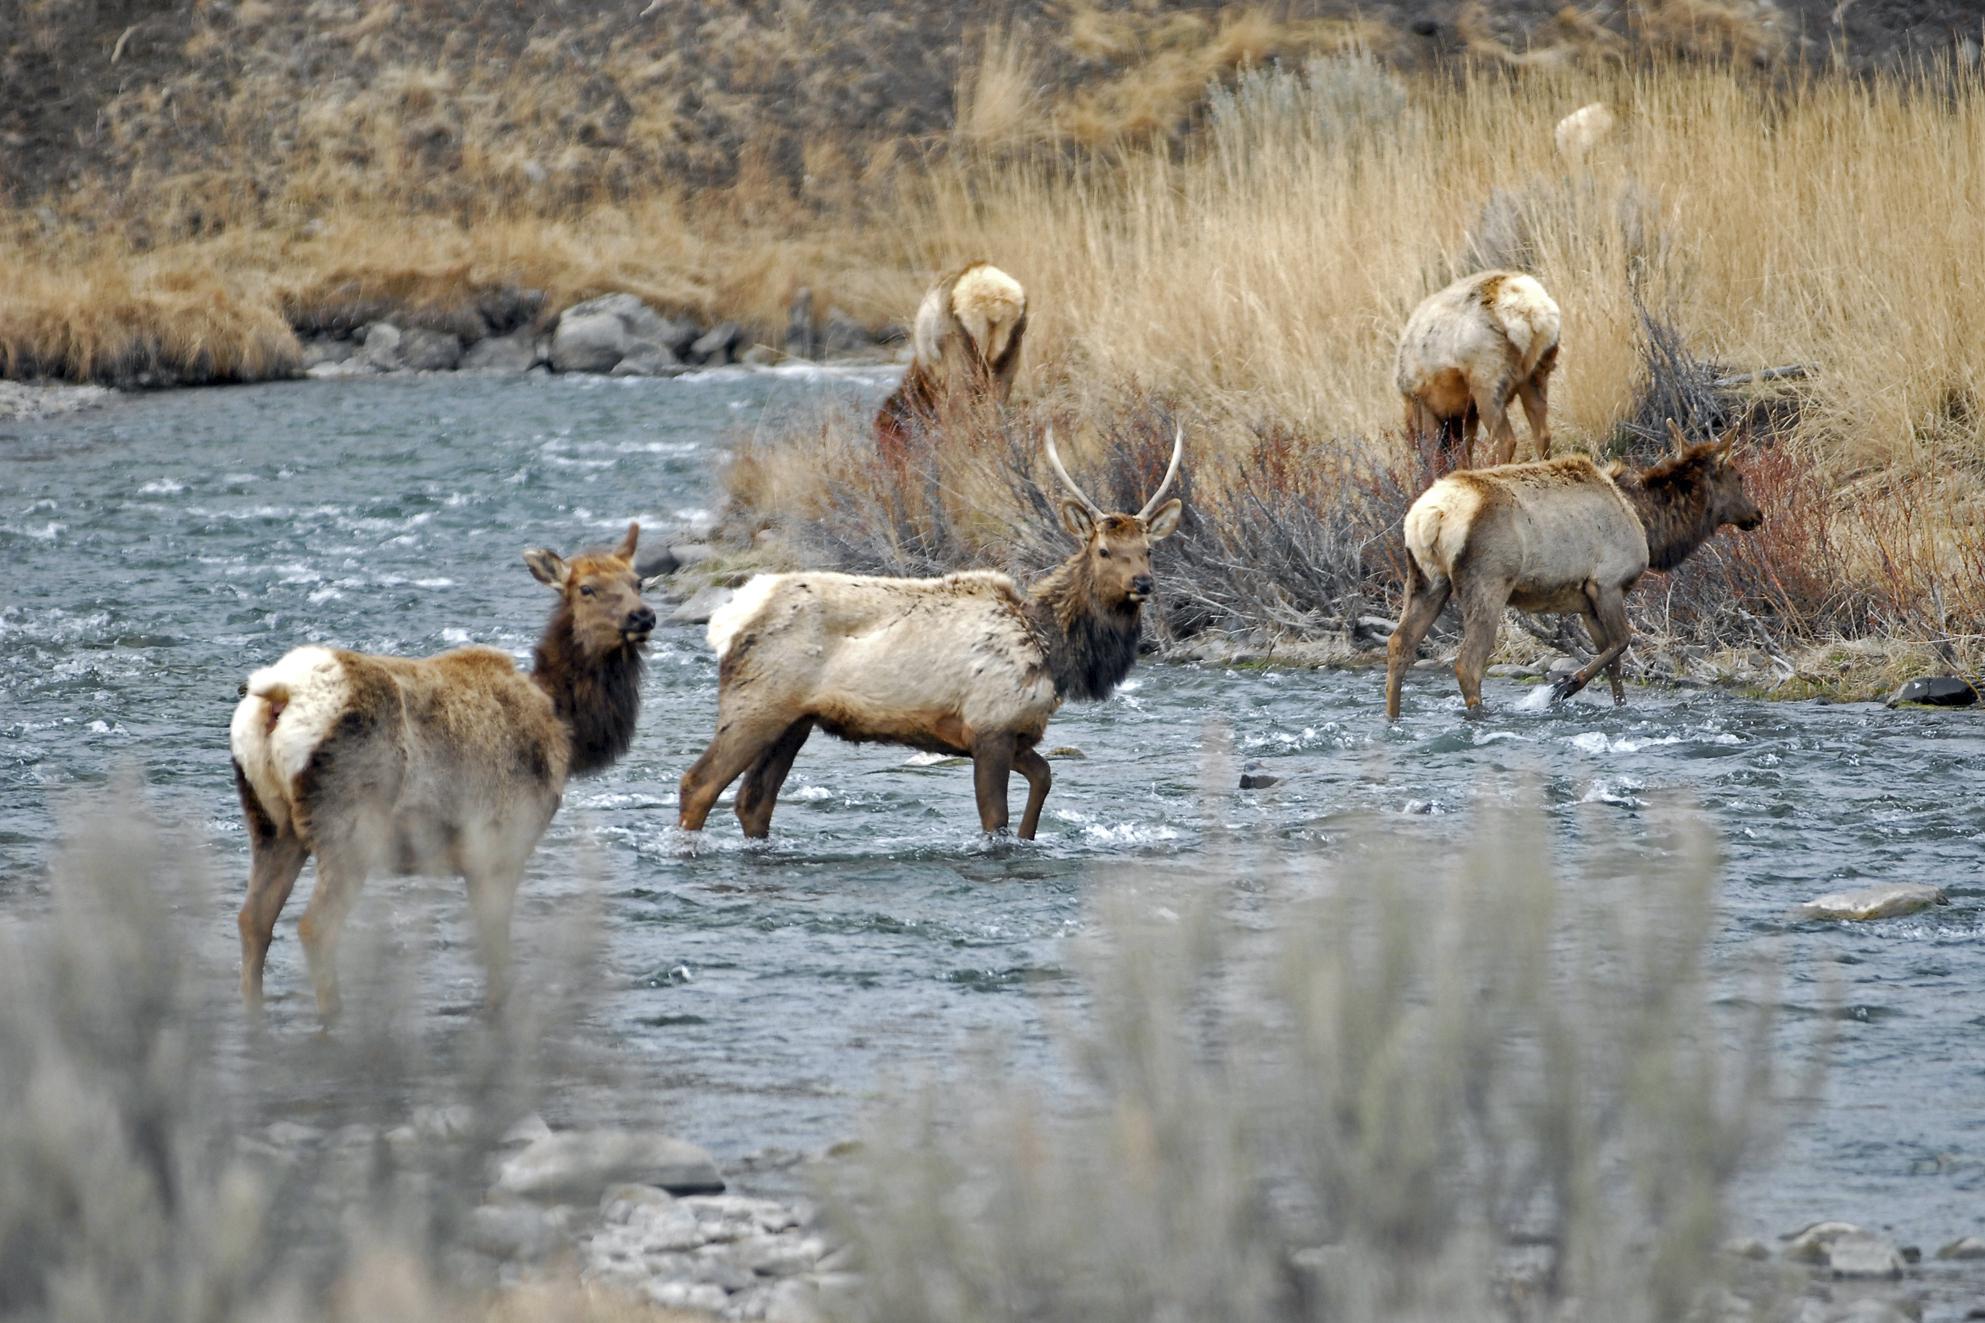 Drought could bring changes to Montana hunting season AP News